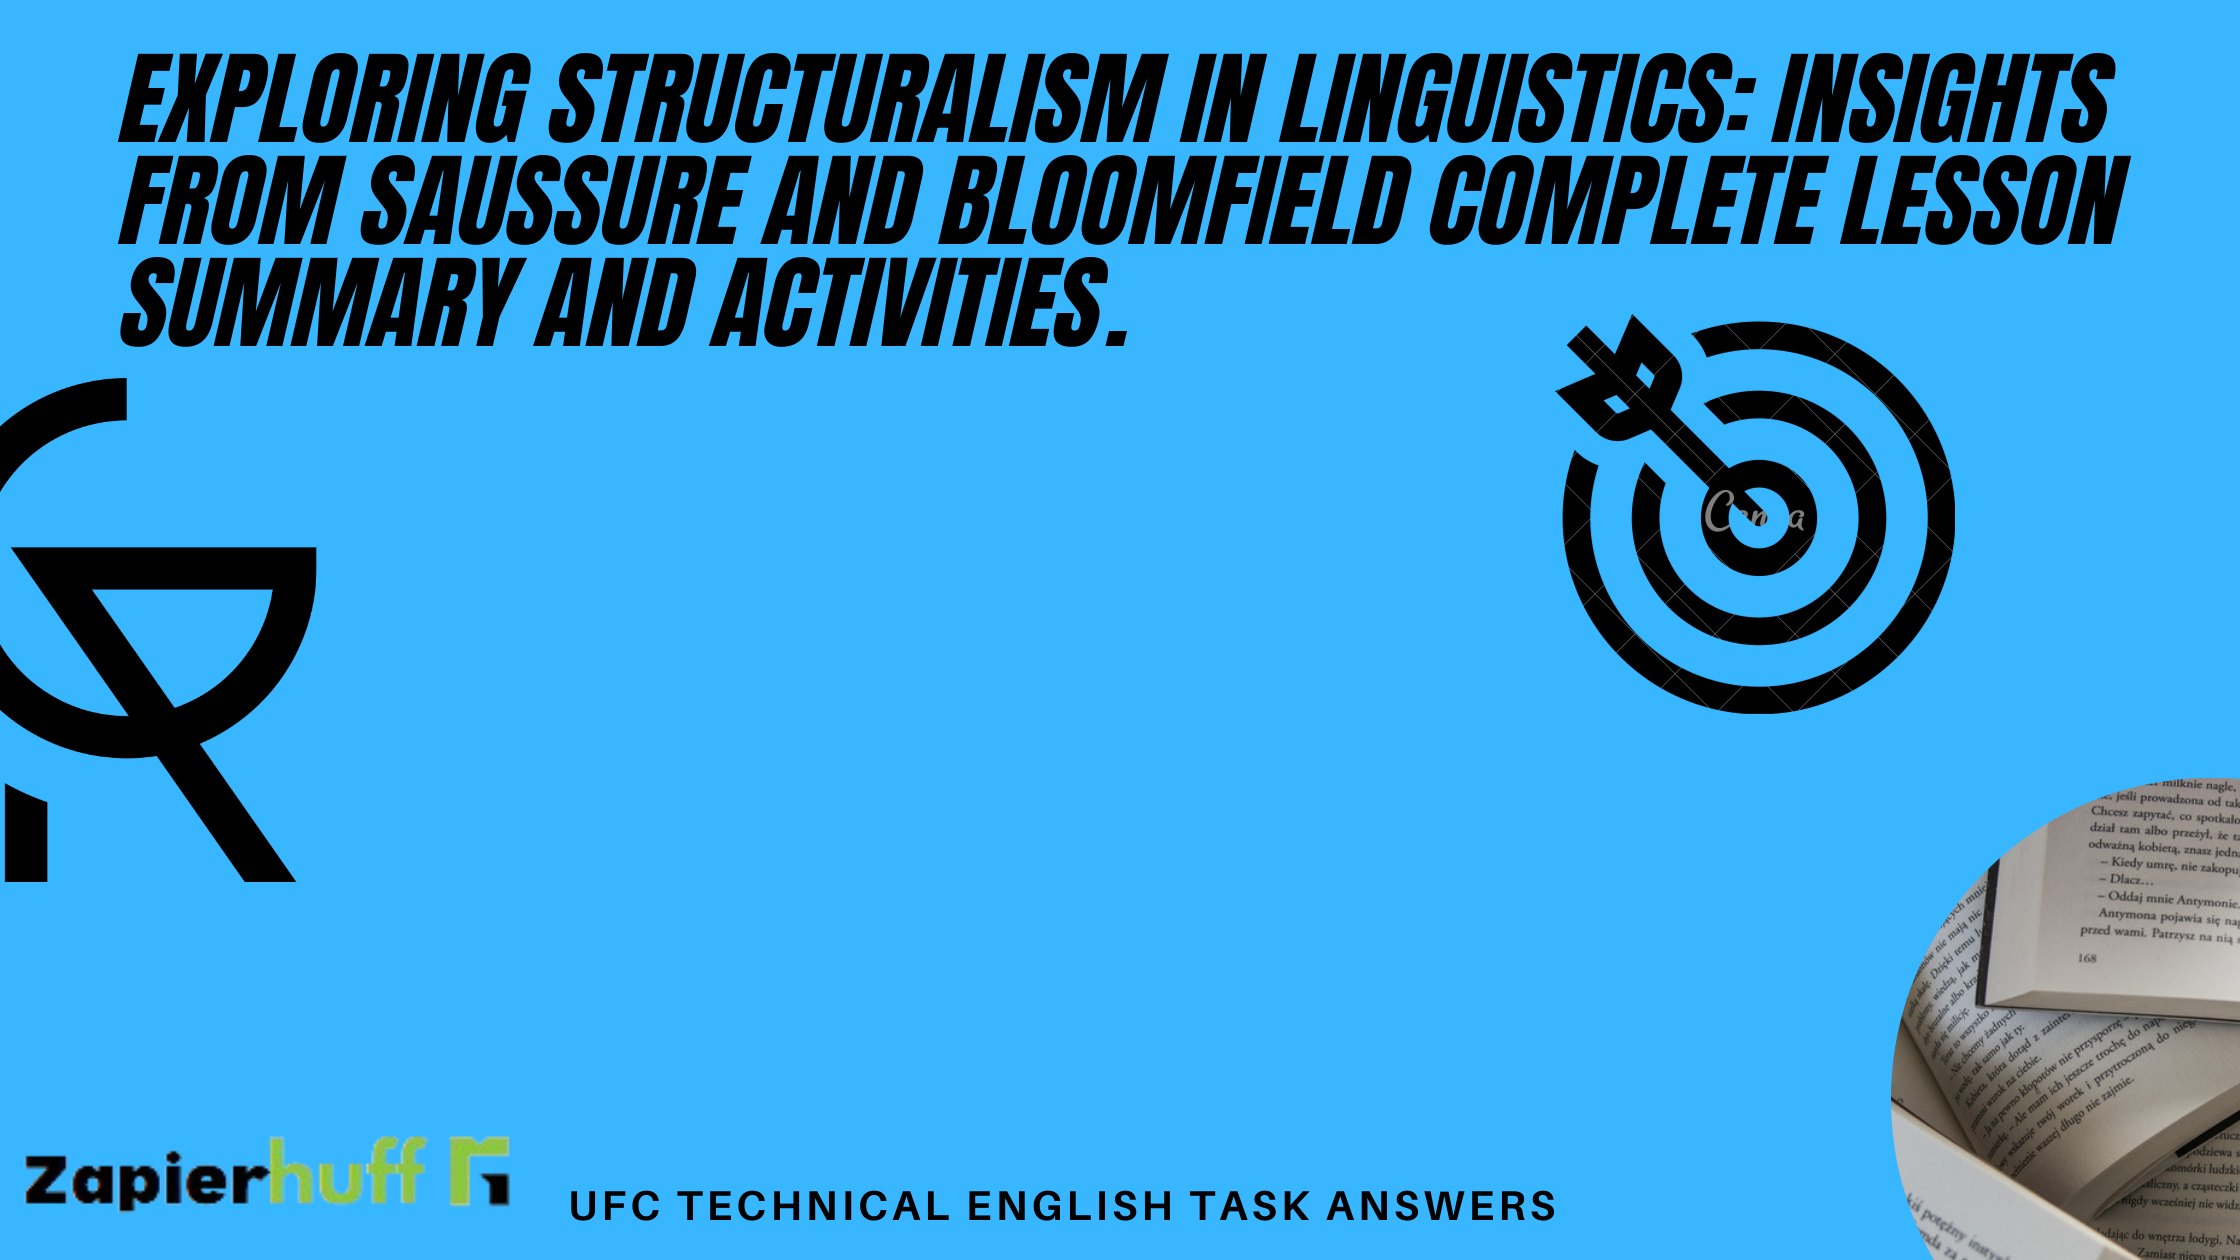 Exploring Structuralism in Linguistics: Insights from Saussure and Bloomfield complete lesson summary and activities.